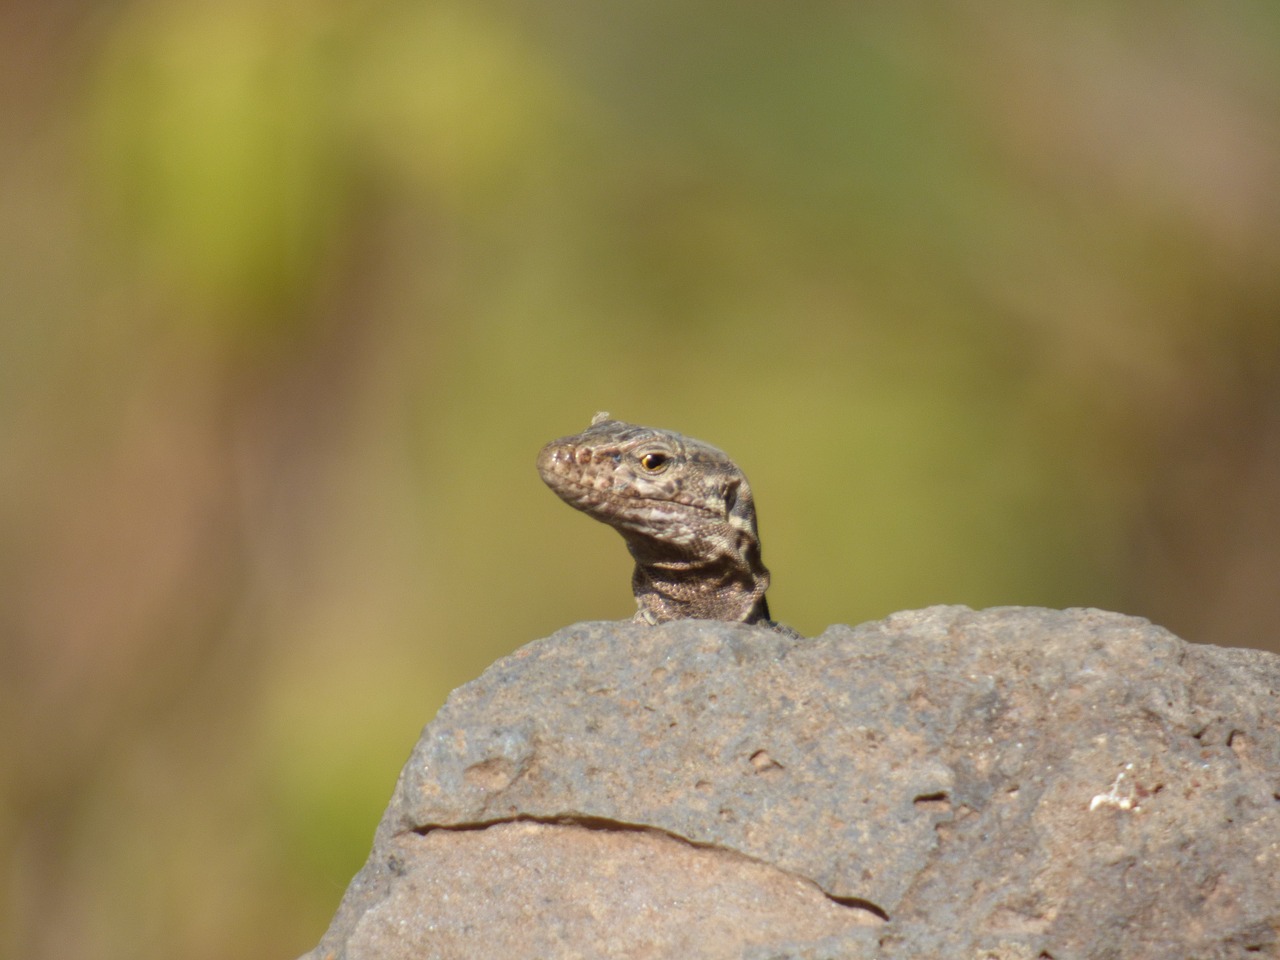 lizard what are you looking at tenerife free photo